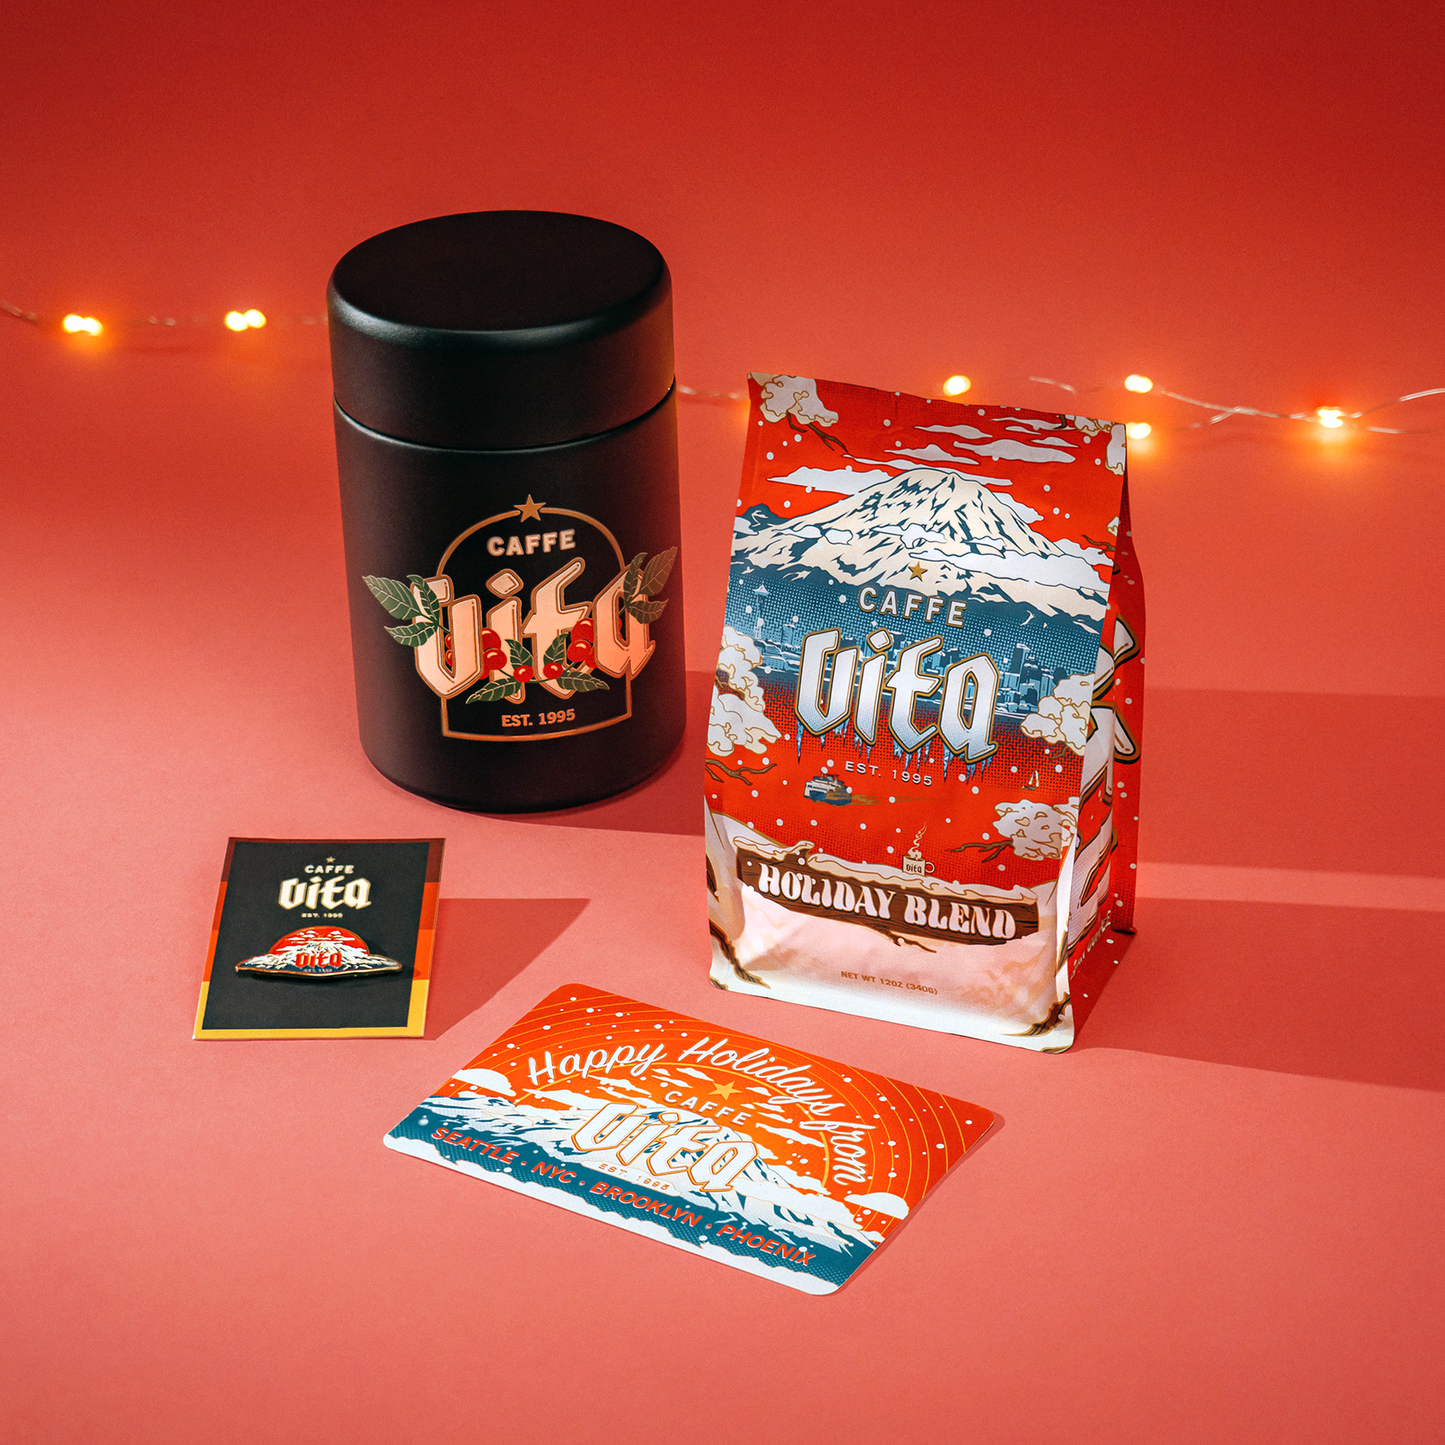 Coffee canister, mountain pin, post card, and holiday blend assembled on red background with tree lights.